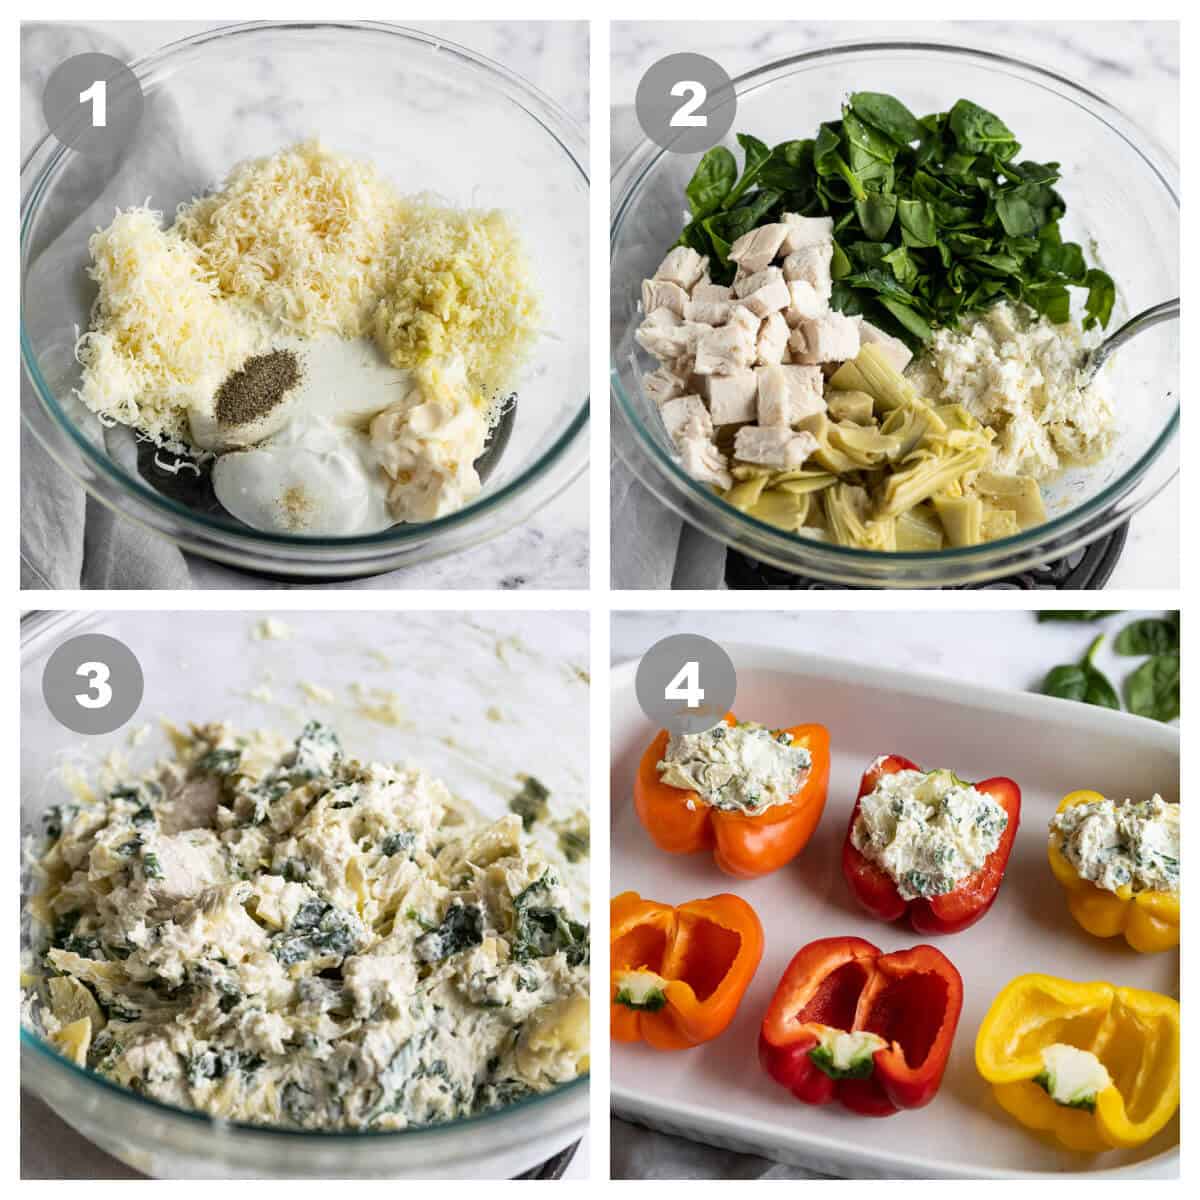 4 image collage showing how to make spinach and artichoke stuffed peppers